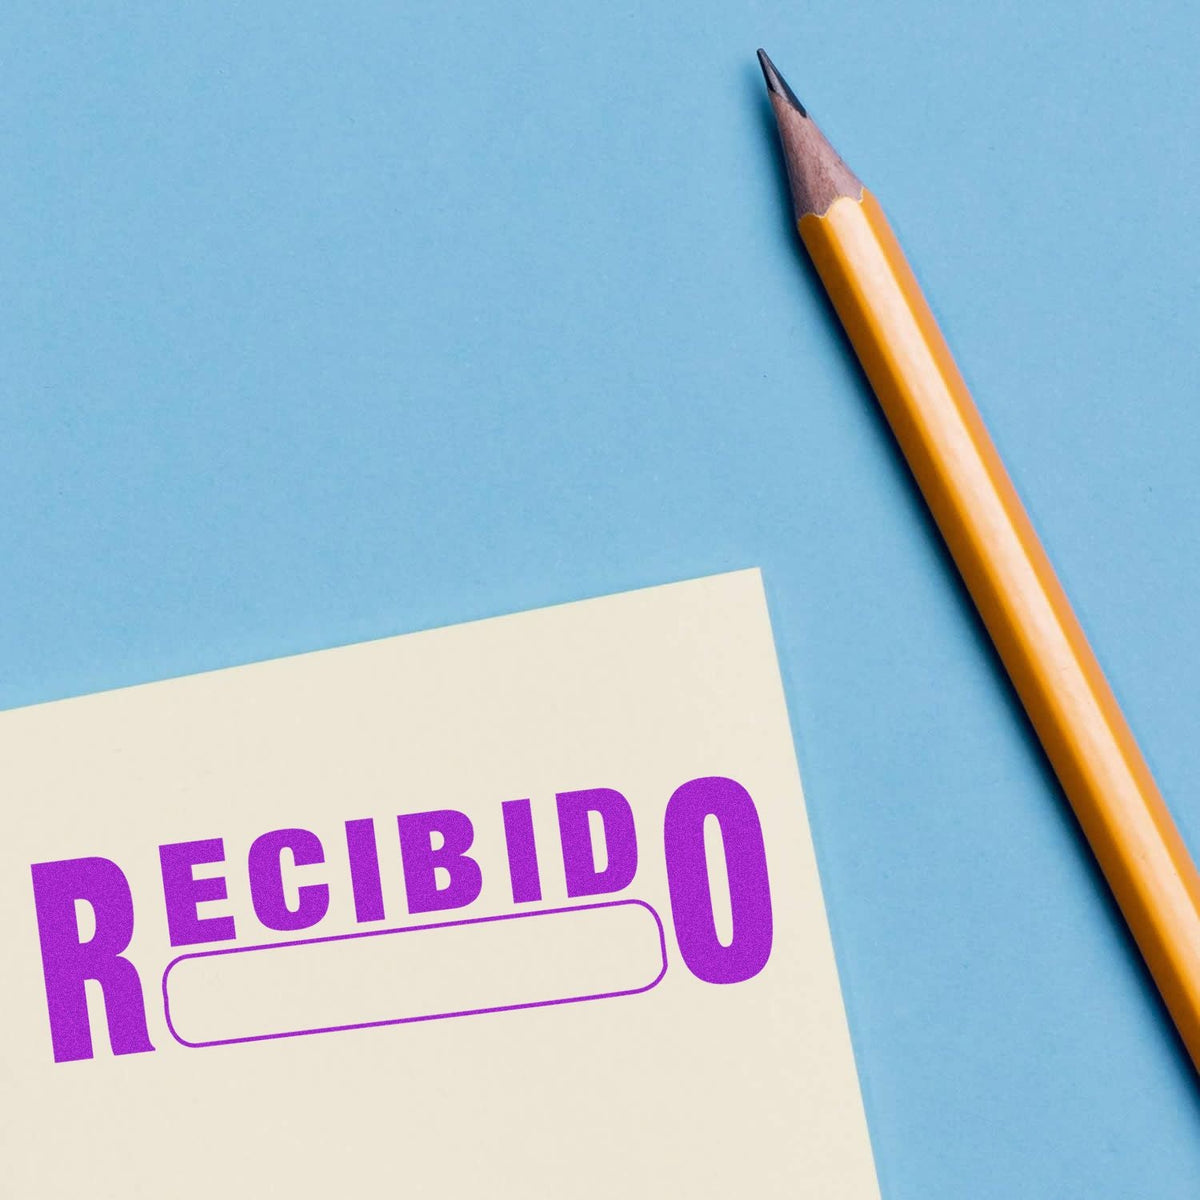 Self-Inking Recibido Stamp In Use